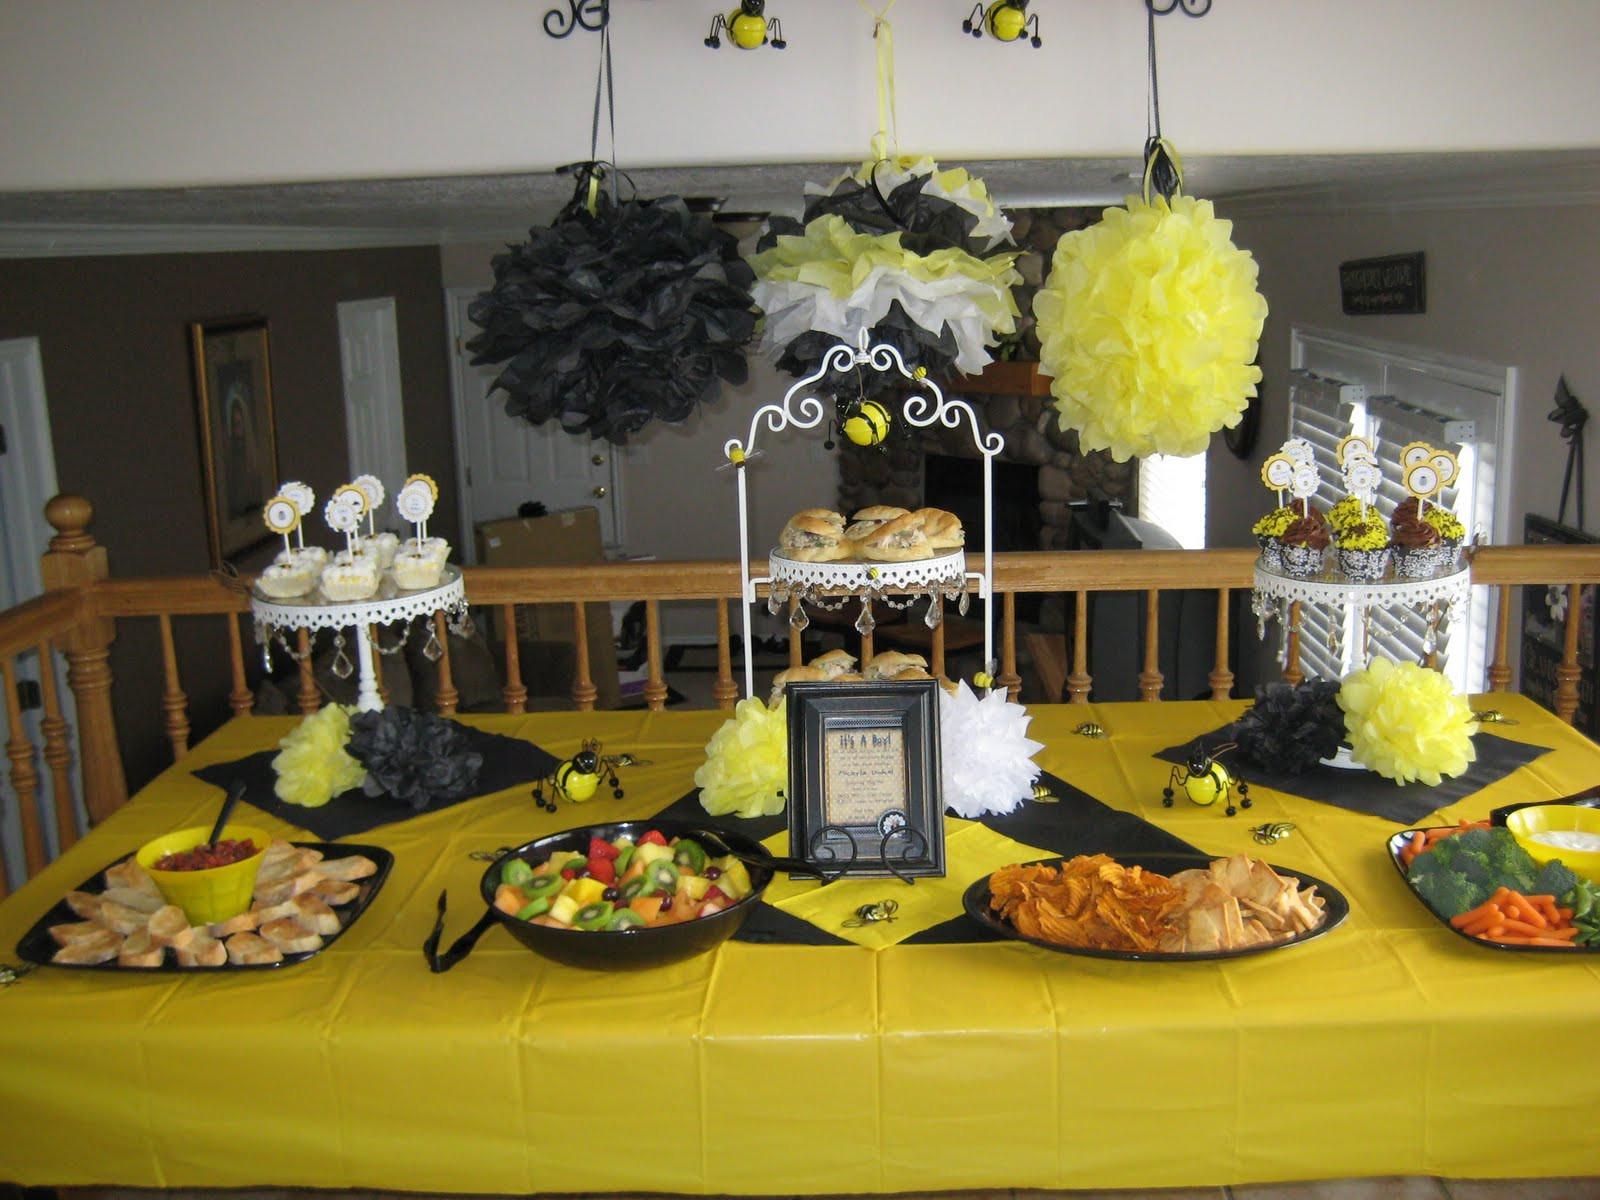 Bumble Bee Baby Shower Decorations Ideas
 Bumble Bee Baby Shower Decorations